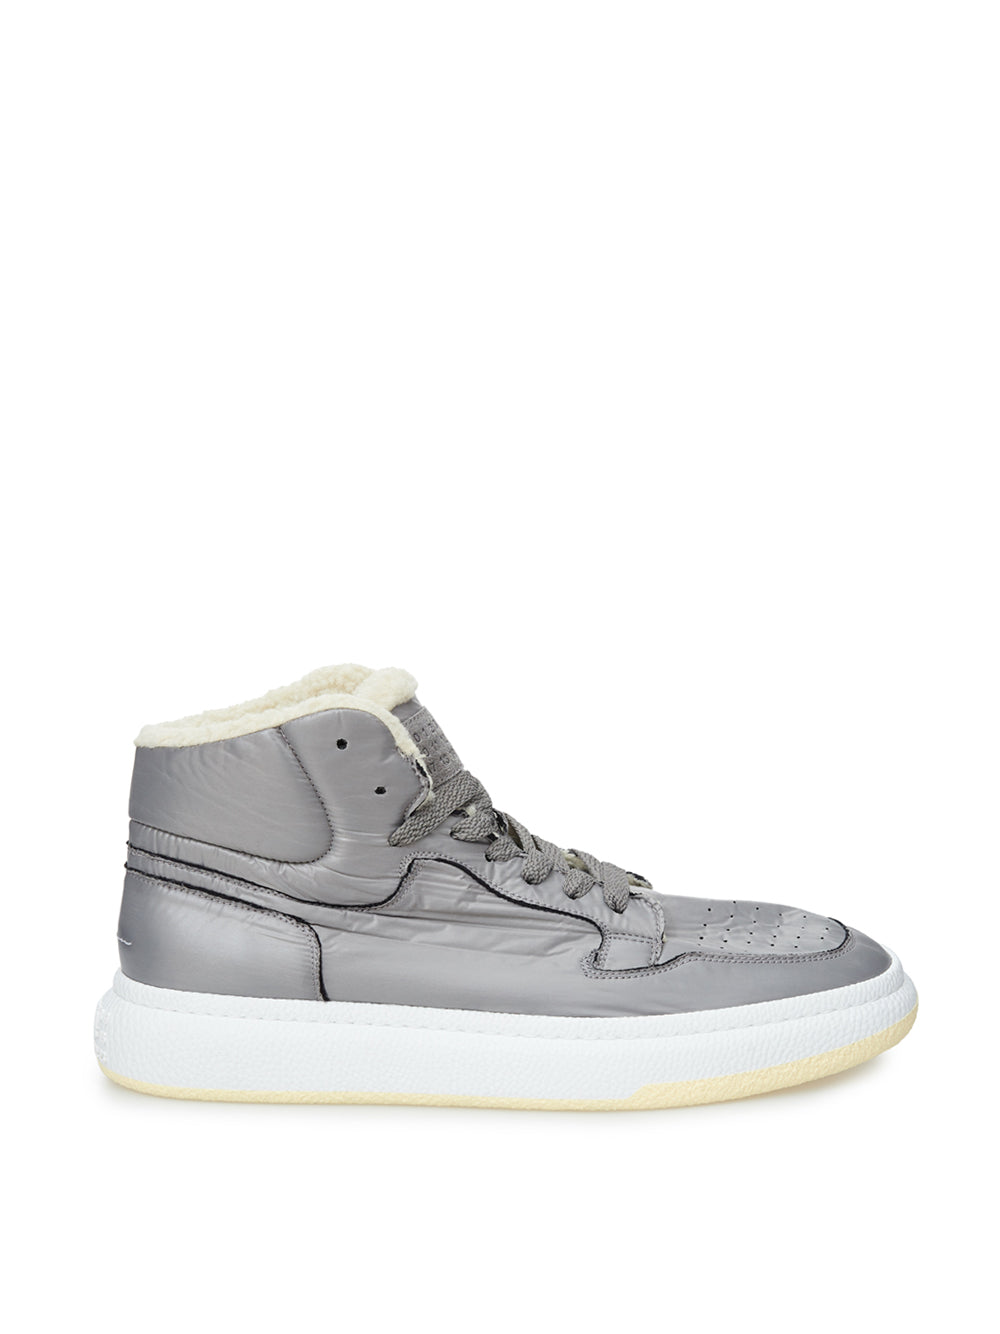 High Sneakers with Internal Fur MM6 Maison Margiela